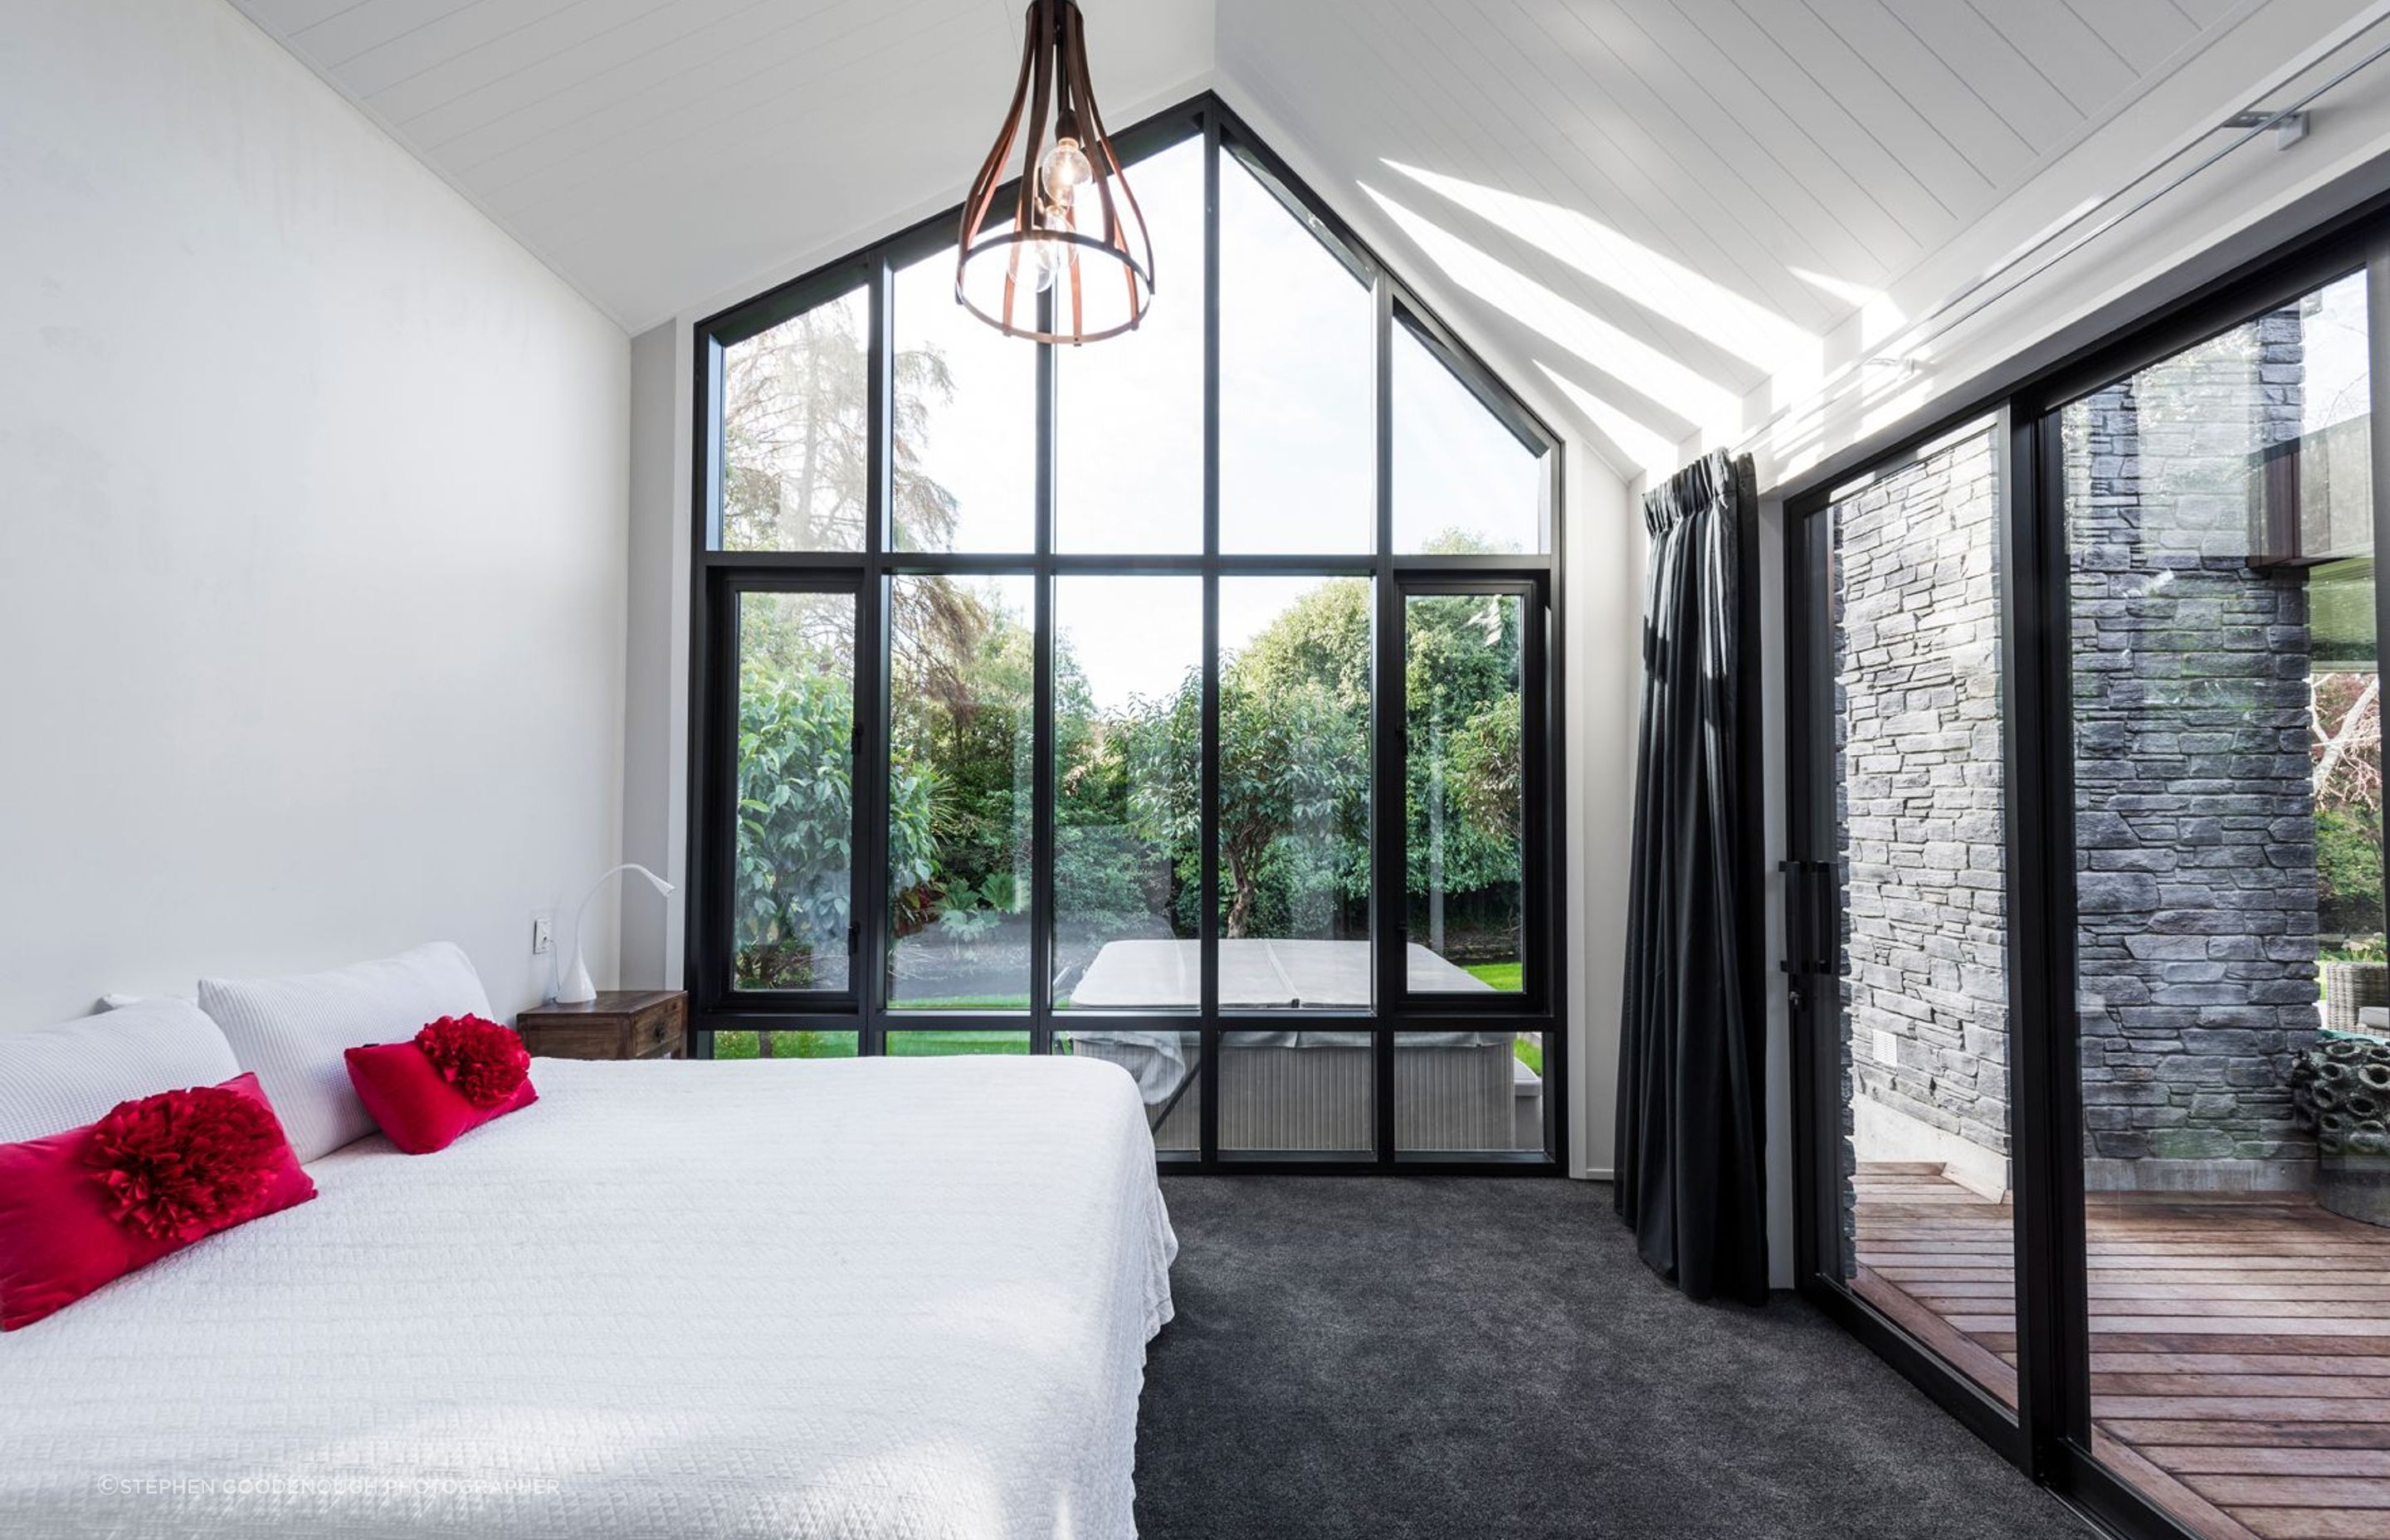 A bedroom with direct views out to the stream has the same asymmetrical apex repeated in its roofline.